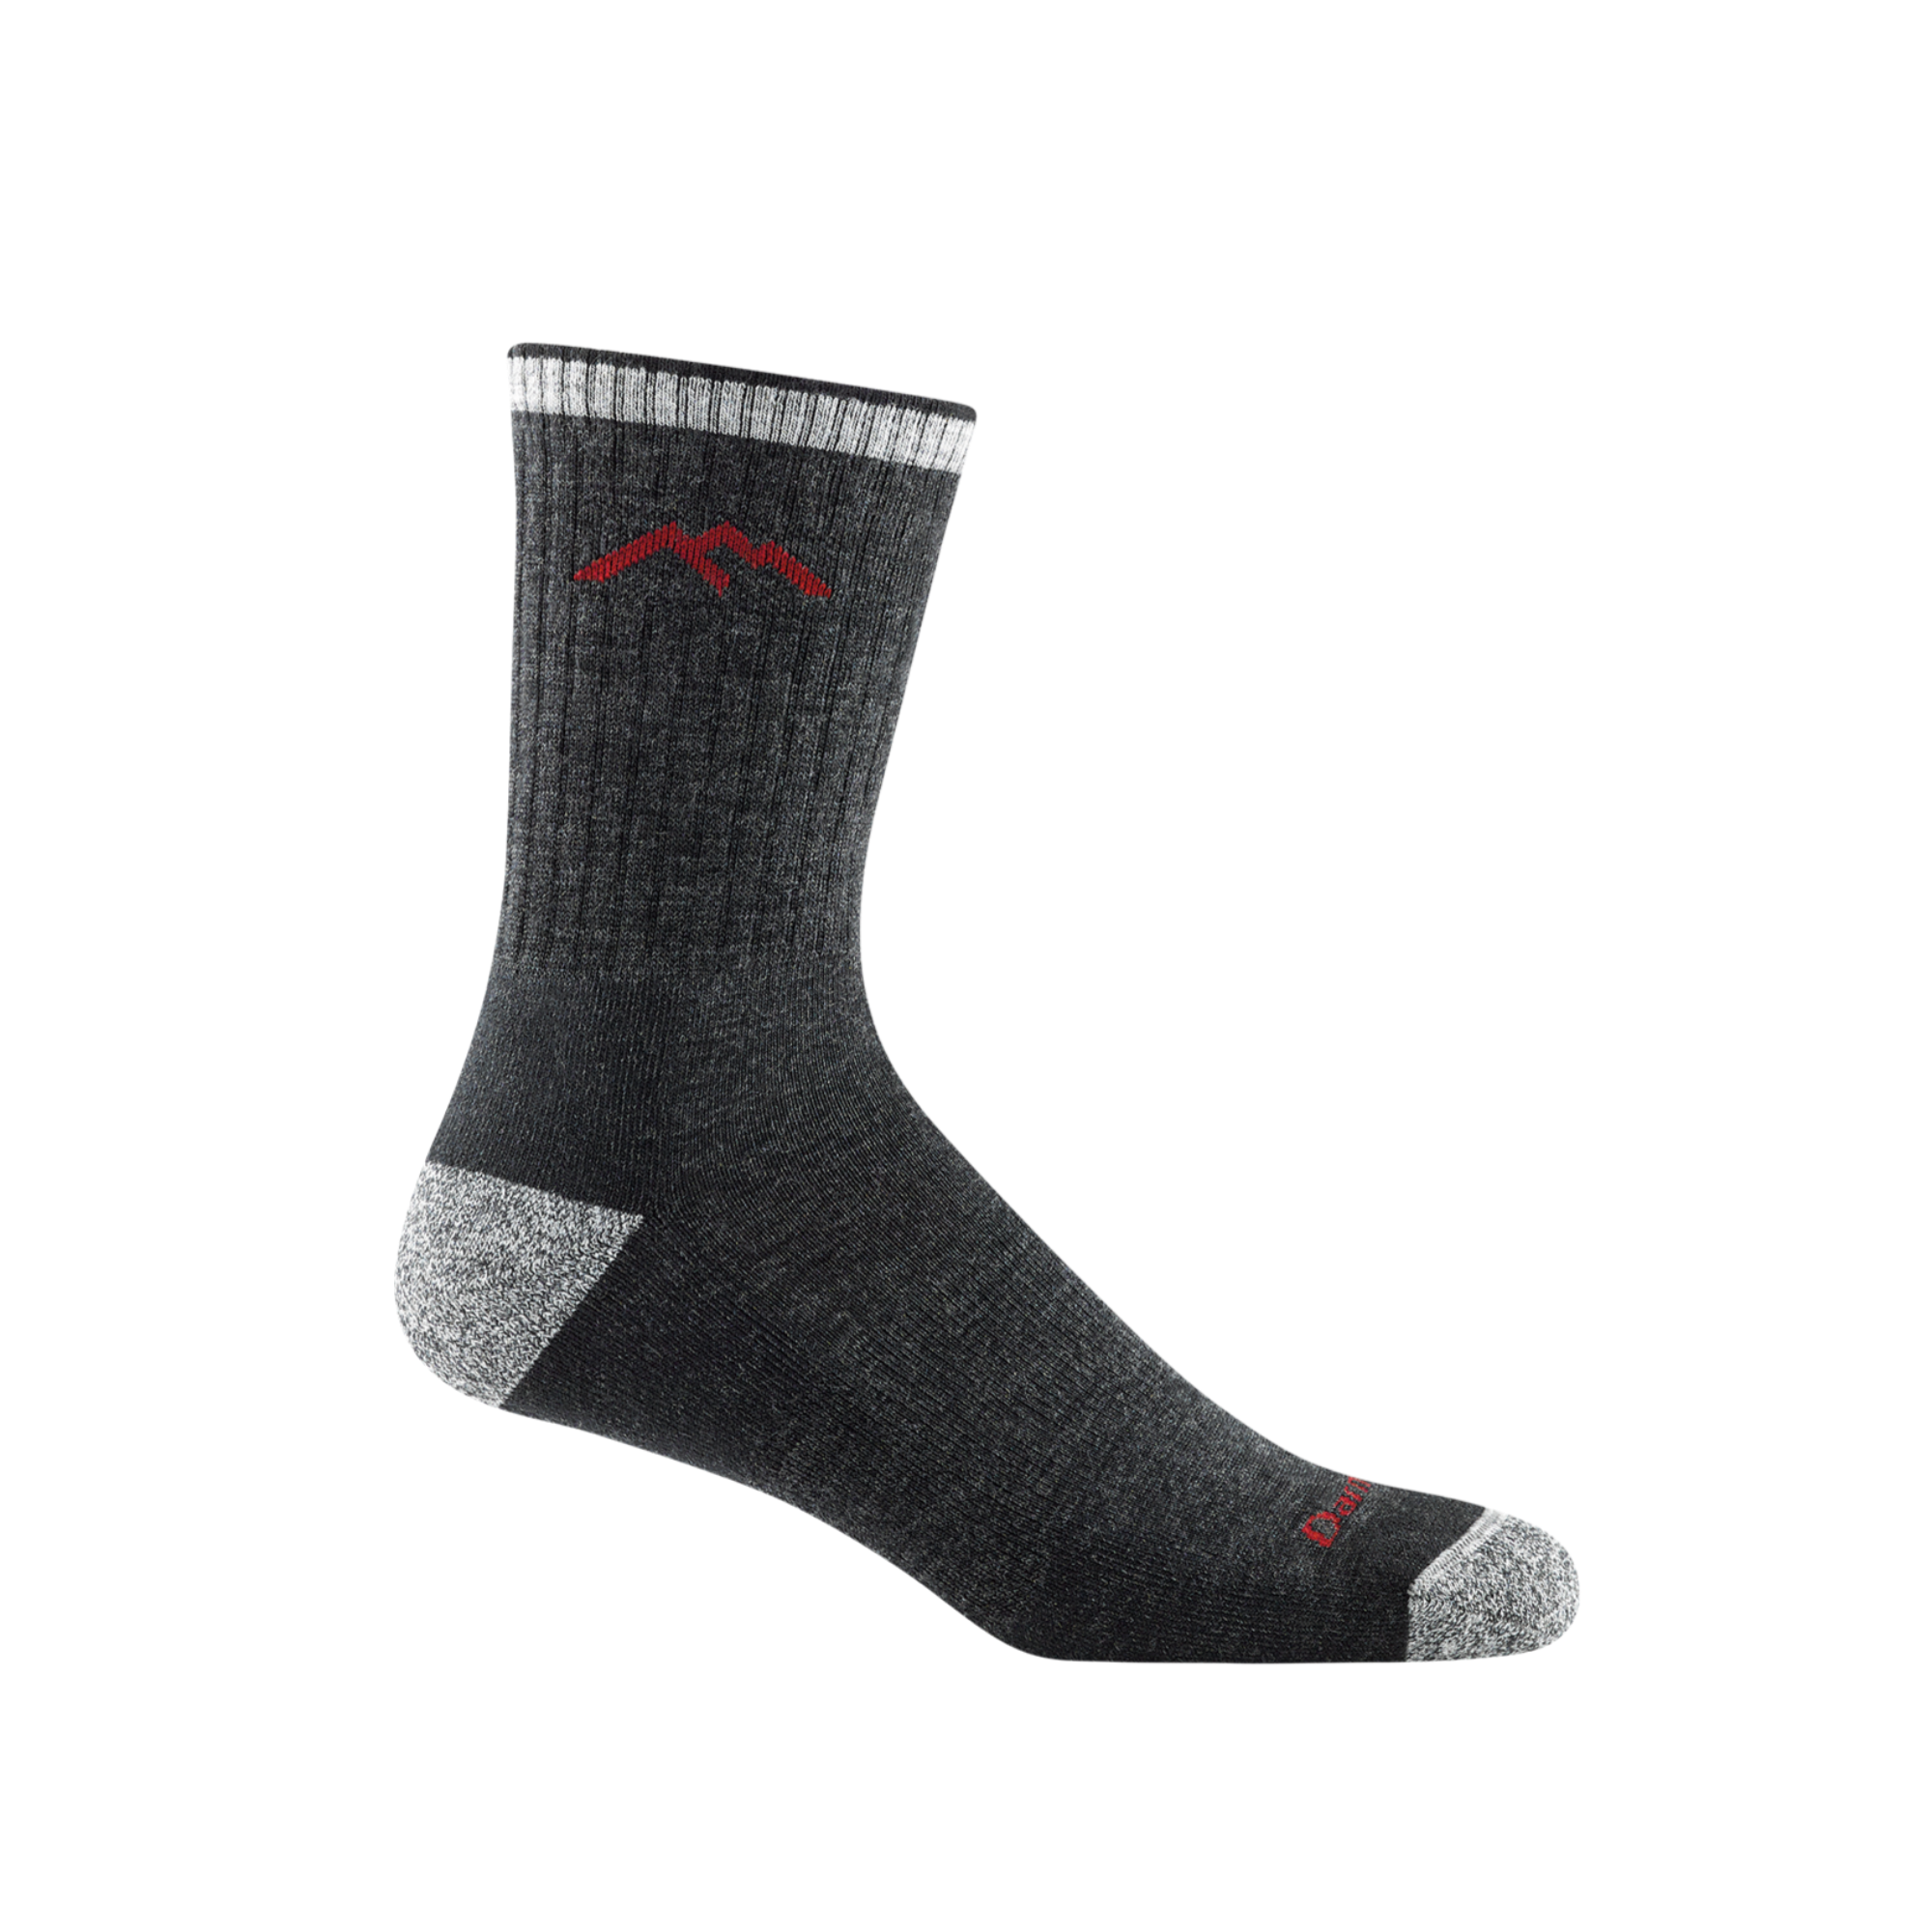 1466 men's micro crew hiking sock in color black with light gray toe/heel accents and red darn tough signature on forefoot